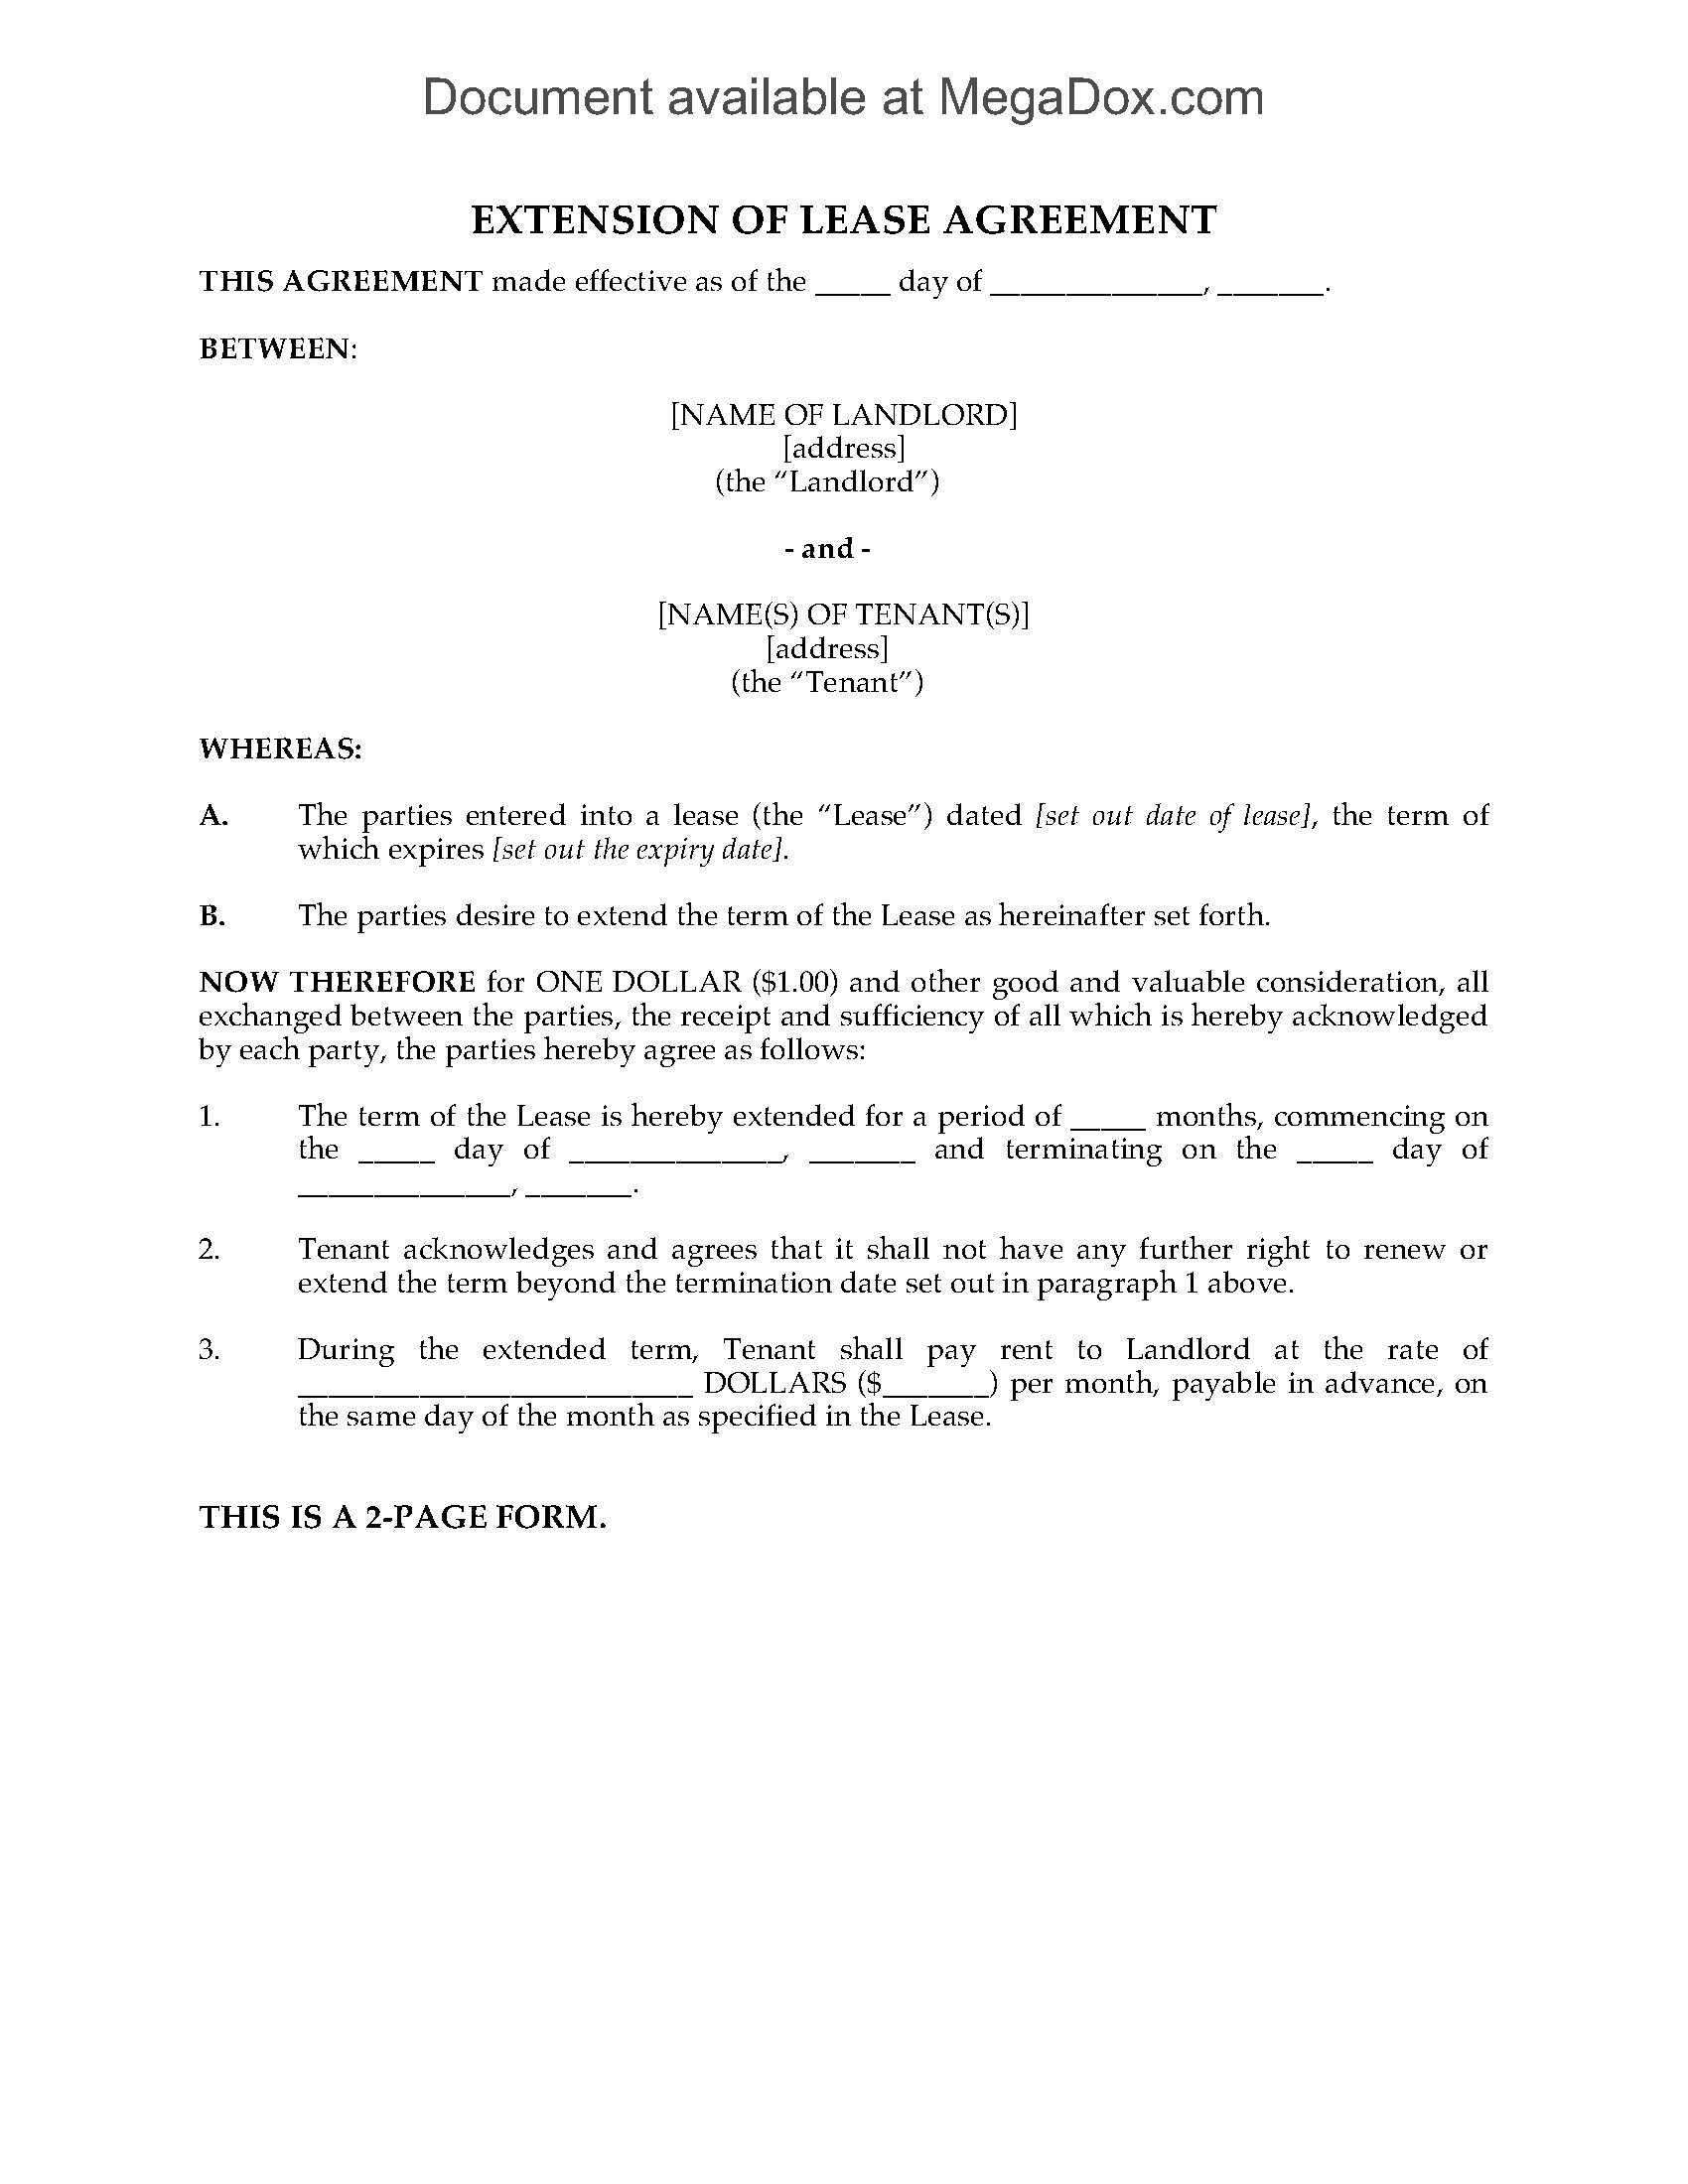 Lease Renewal Letter To Tenant Template from www.megadox.com